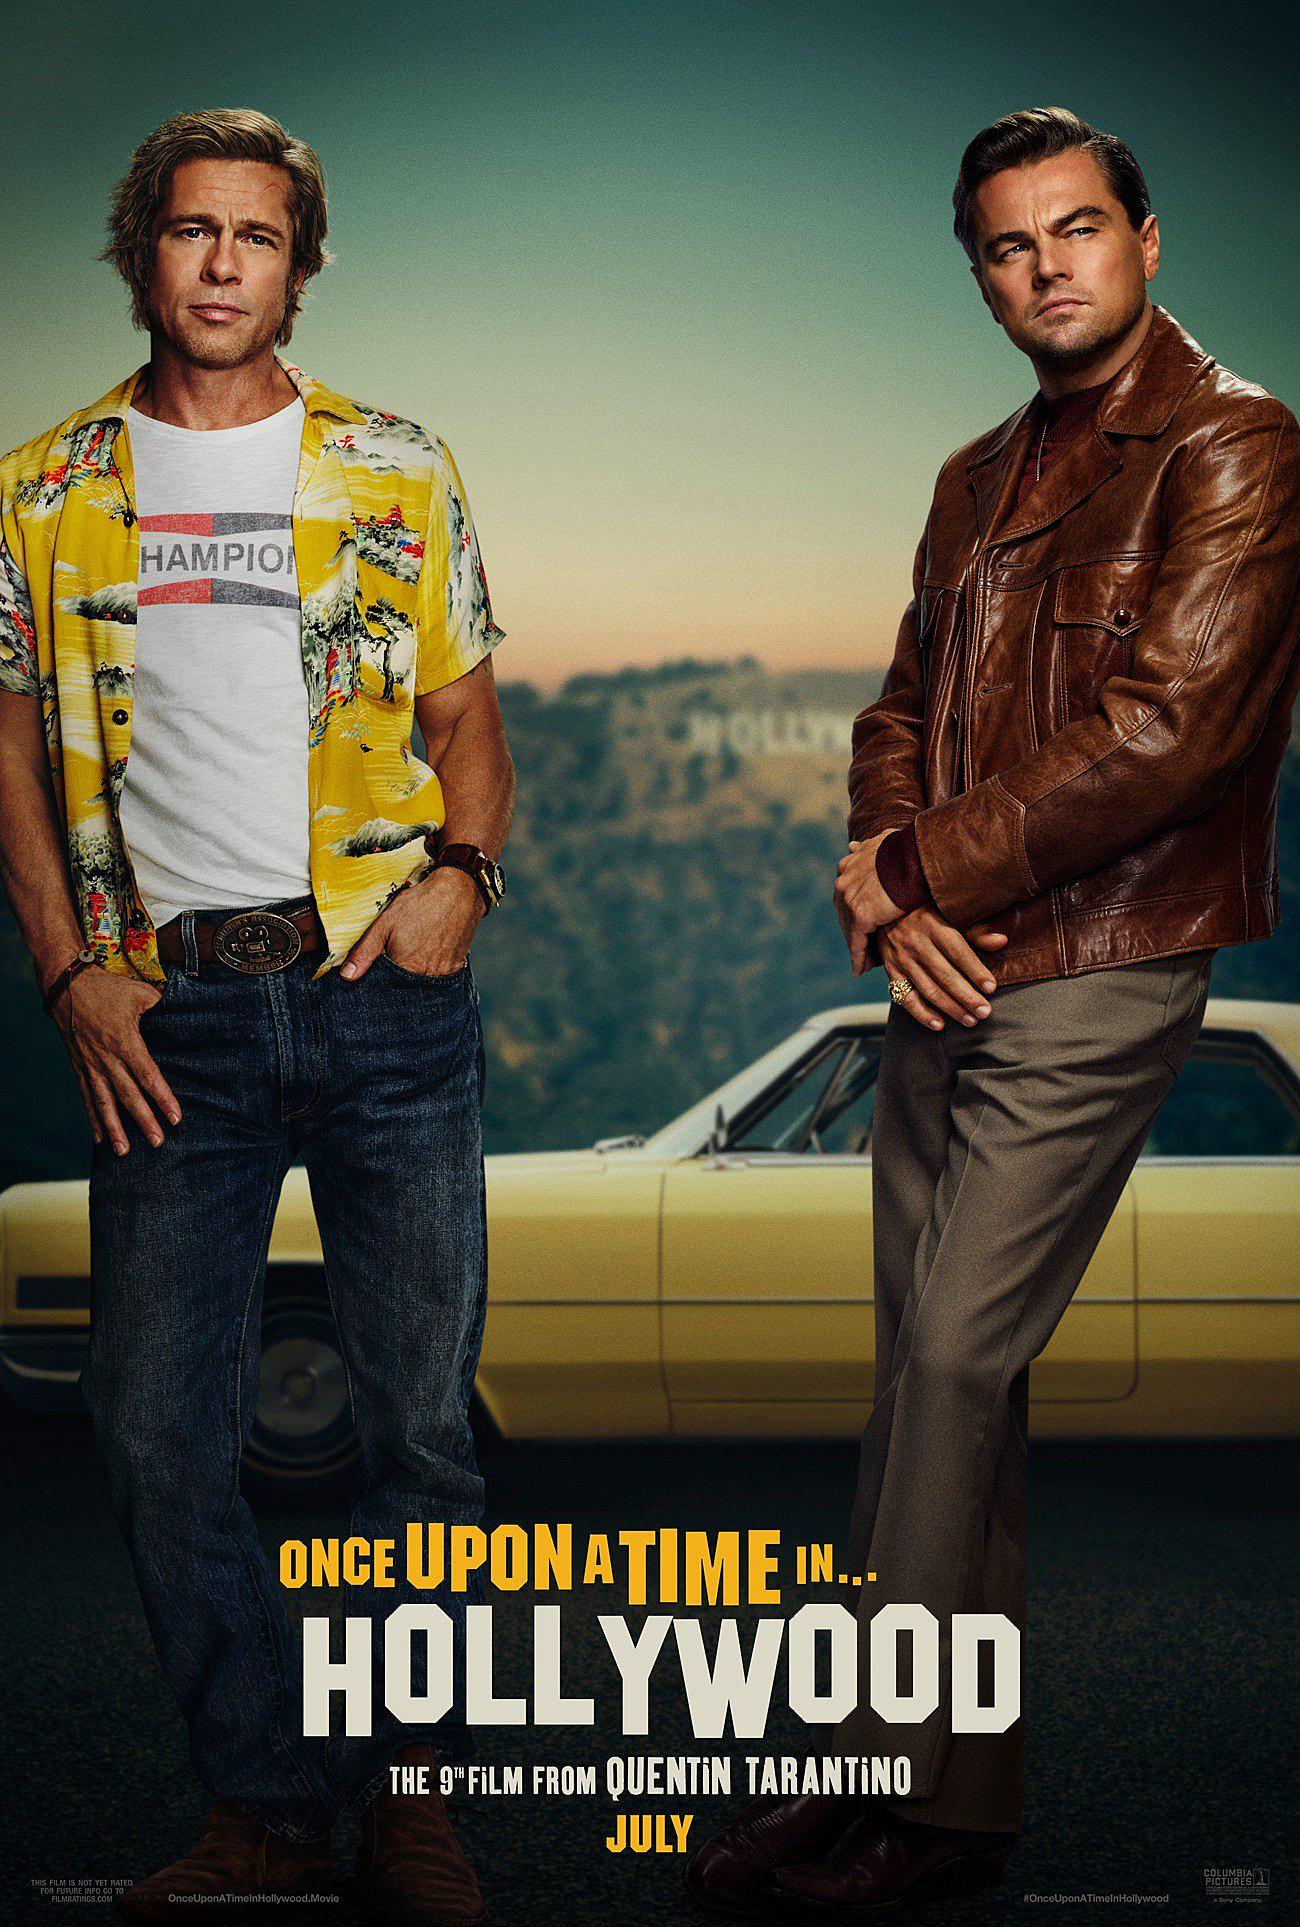 WATCH: Trailer and posters drop for Quentin Tarantino's Once Upon A Time… In Hollywood